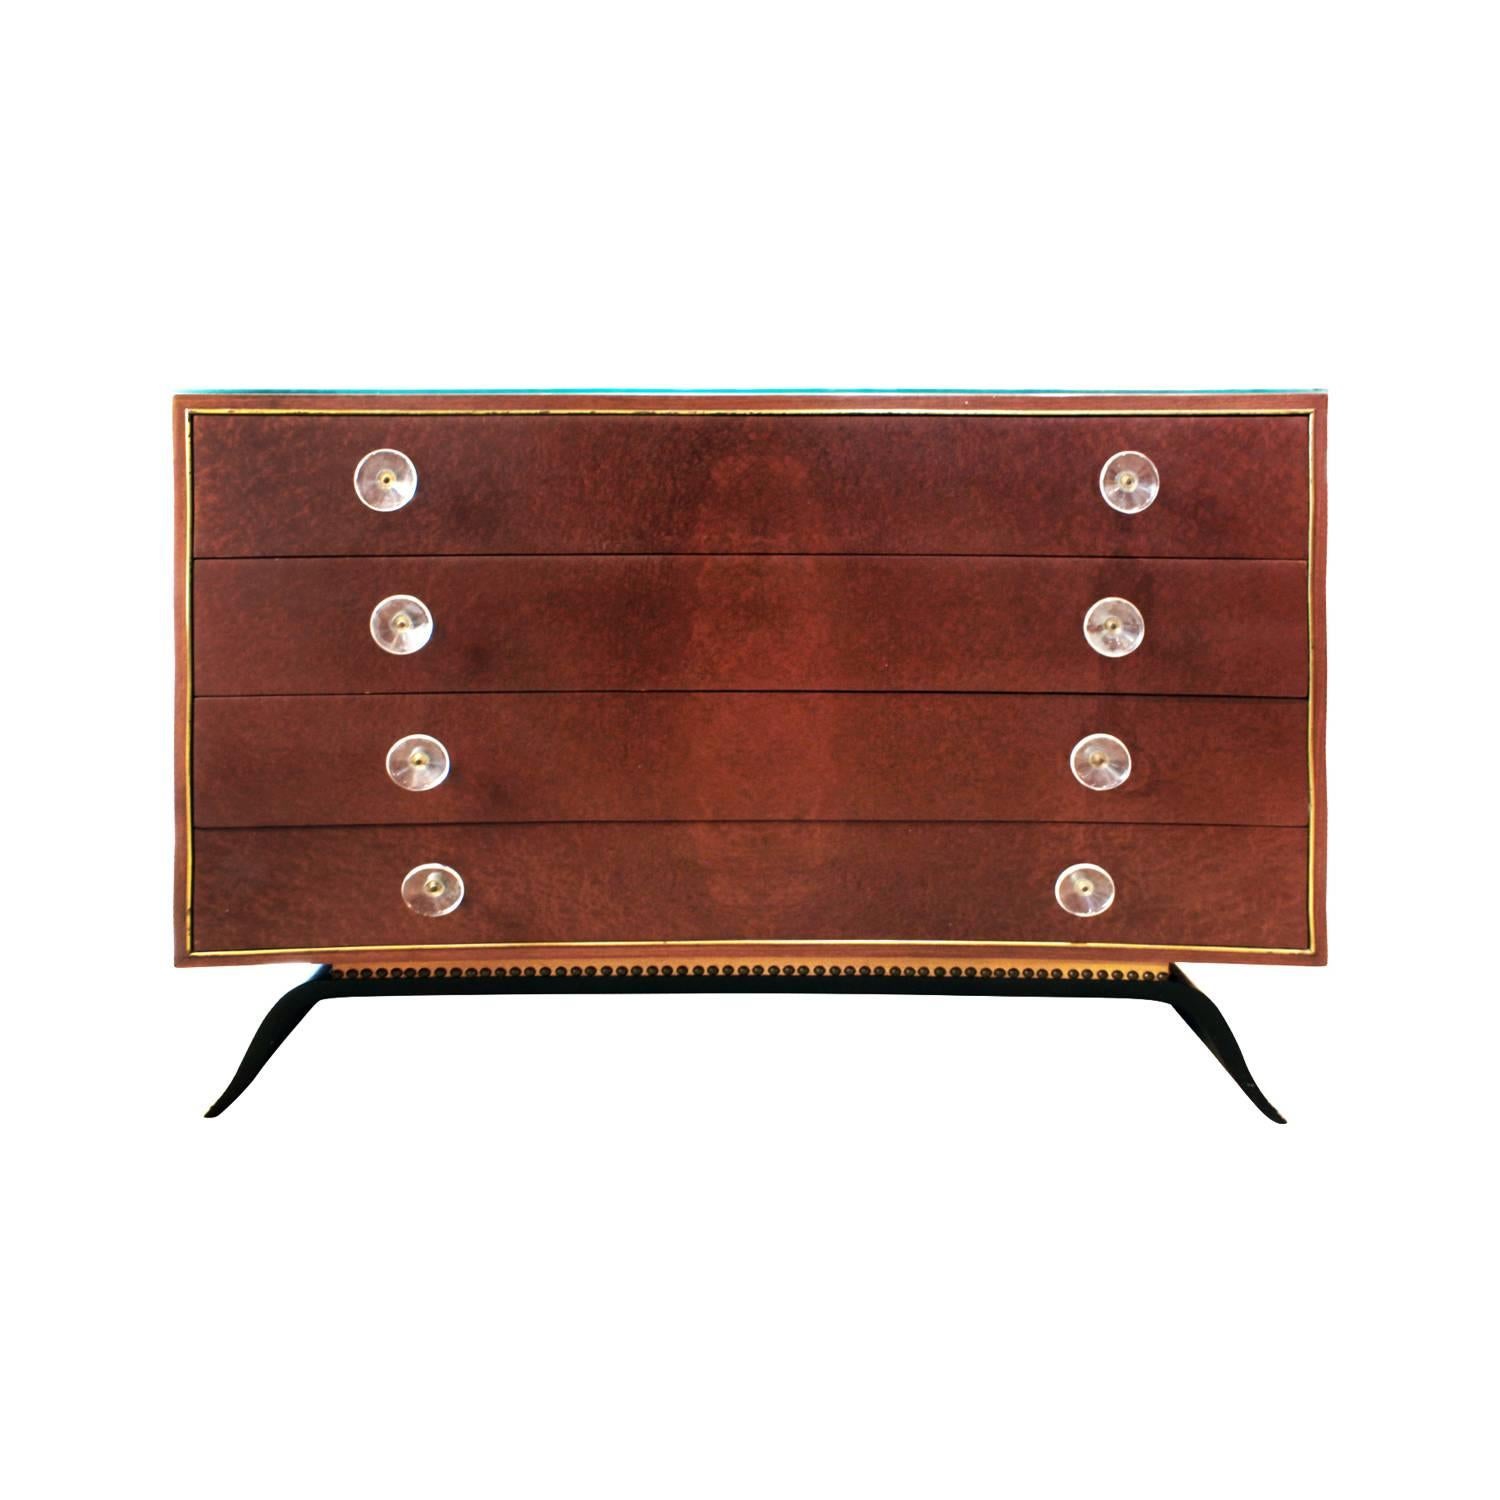 Elegant chest of drawers no. 3920 in East India rosewood and Sequoia burl with leather trim with custom glass top designed by Gilbert Rohde for Herman Miller, American 1939. (